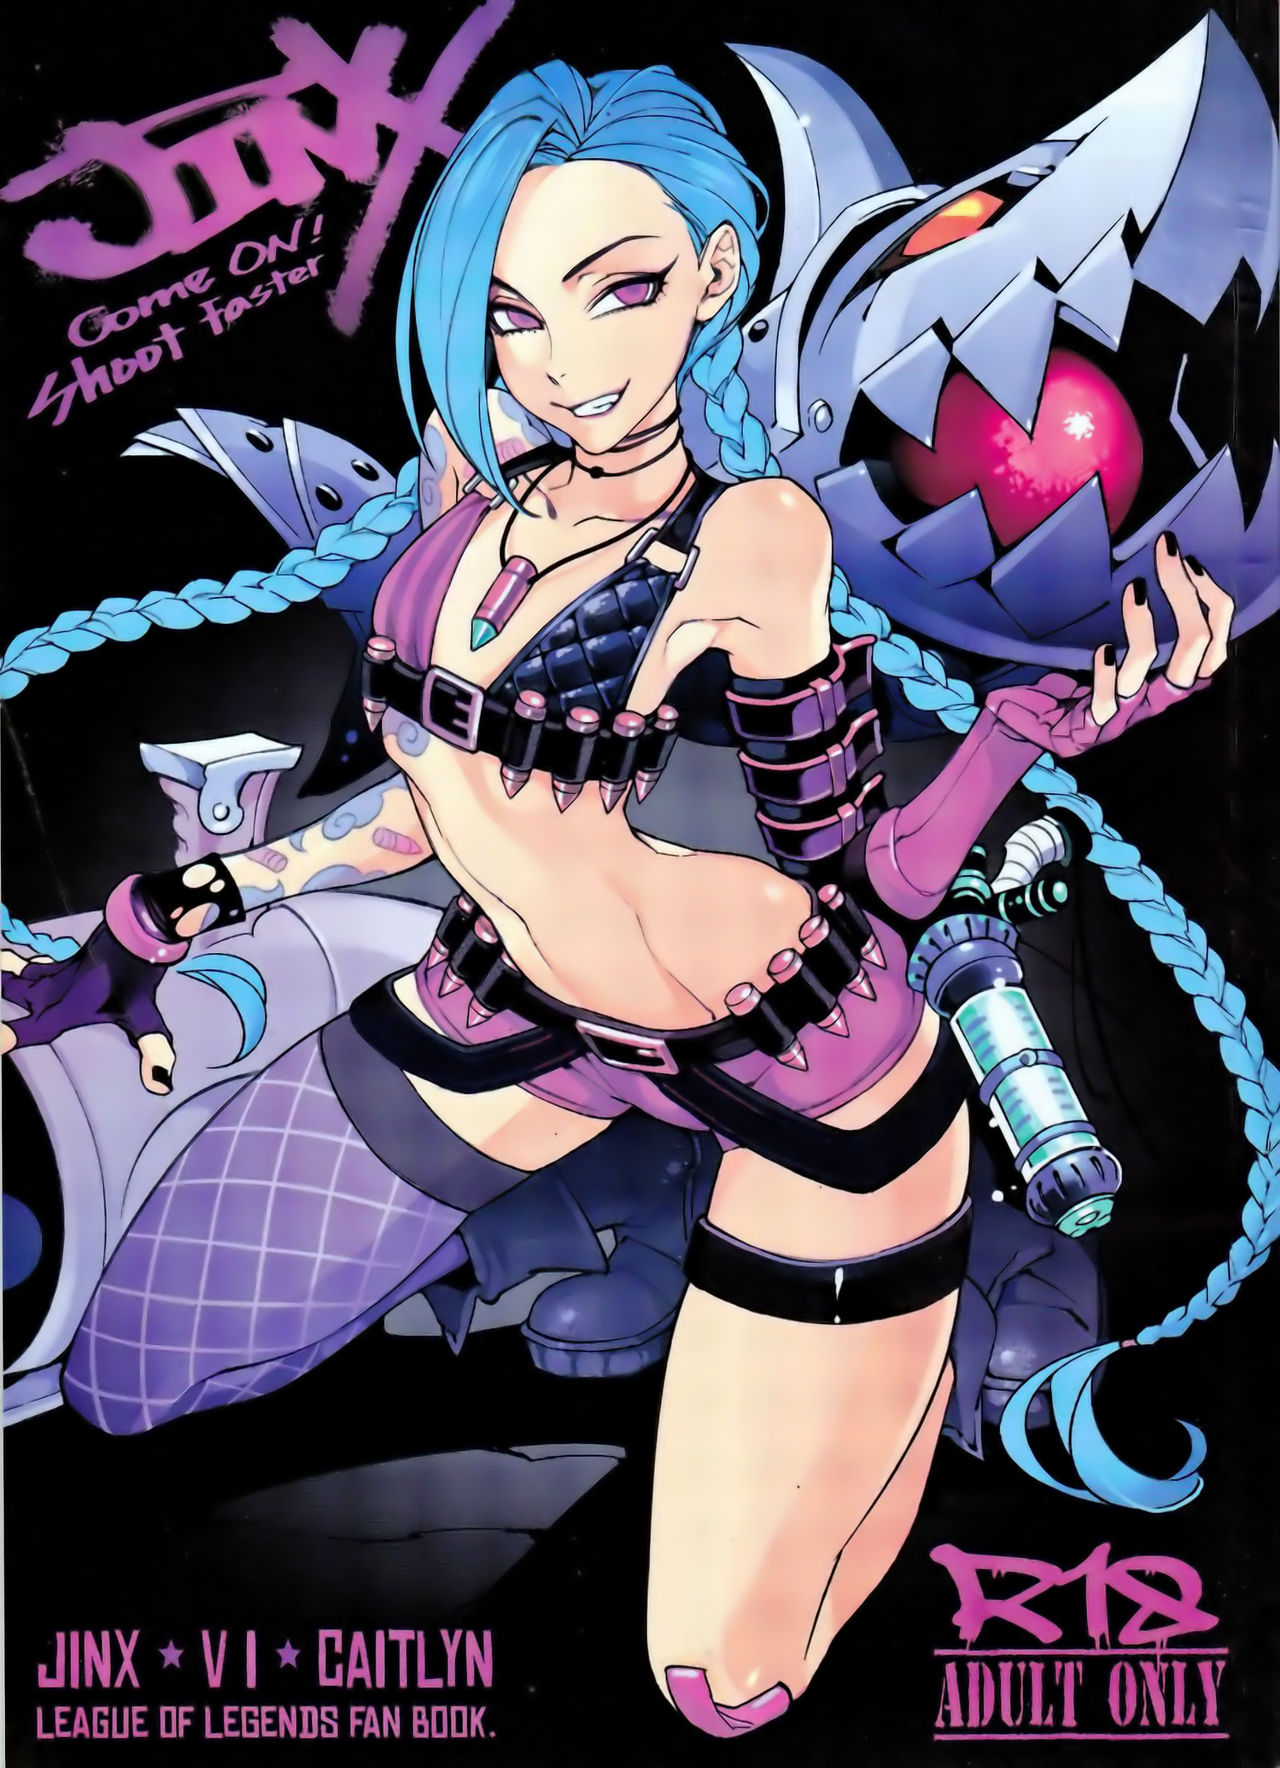 (FF23) [Turtle.Fish.Paint (Hirame Sensei)] JINX Come On! Shoot Faster (League of Legends) [Chinese] [colorized] (FF23) [Turtle.Fish.Paint (比目魚先生)] JINX Come On! Shoot Faster (リーグ・オブ・レジェンズ) [中国語] [カラー化]